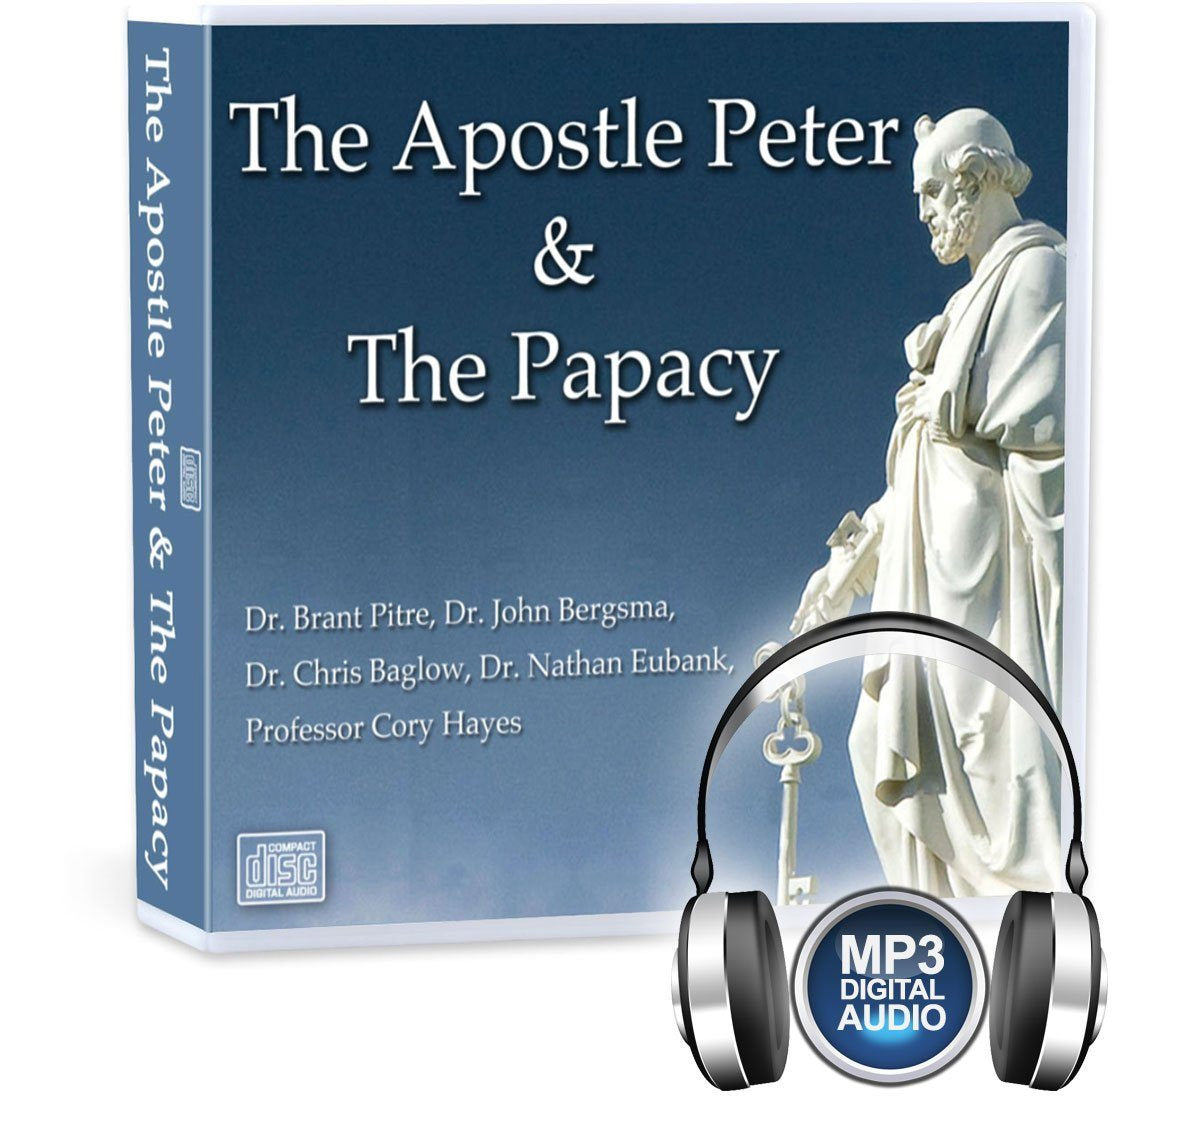 In this conference recording on CD on Peter and the Papacy learn about Peter's spiritual development in scripture, the infallibility yet sinfulness of Popes, the relationship of bishops and the Pope and Peter as the Rock of the Church Jesus founded.